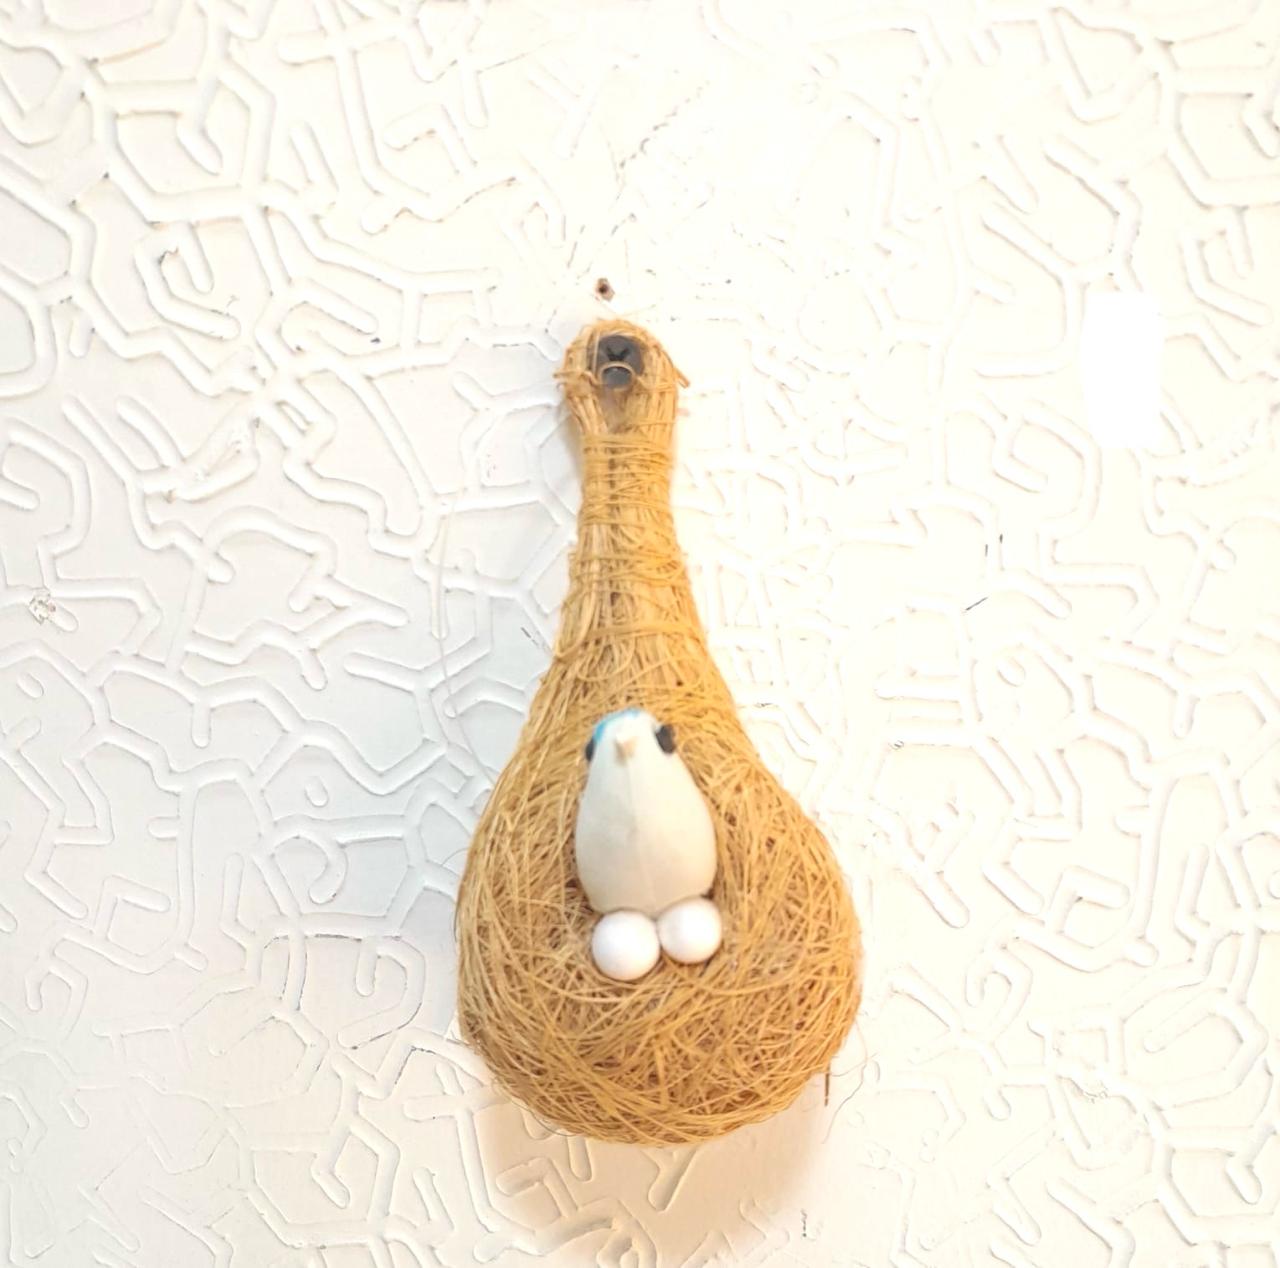 Bird Nest Hanging Attractive Garden & Home Decoration Made in India By Tamrapatra